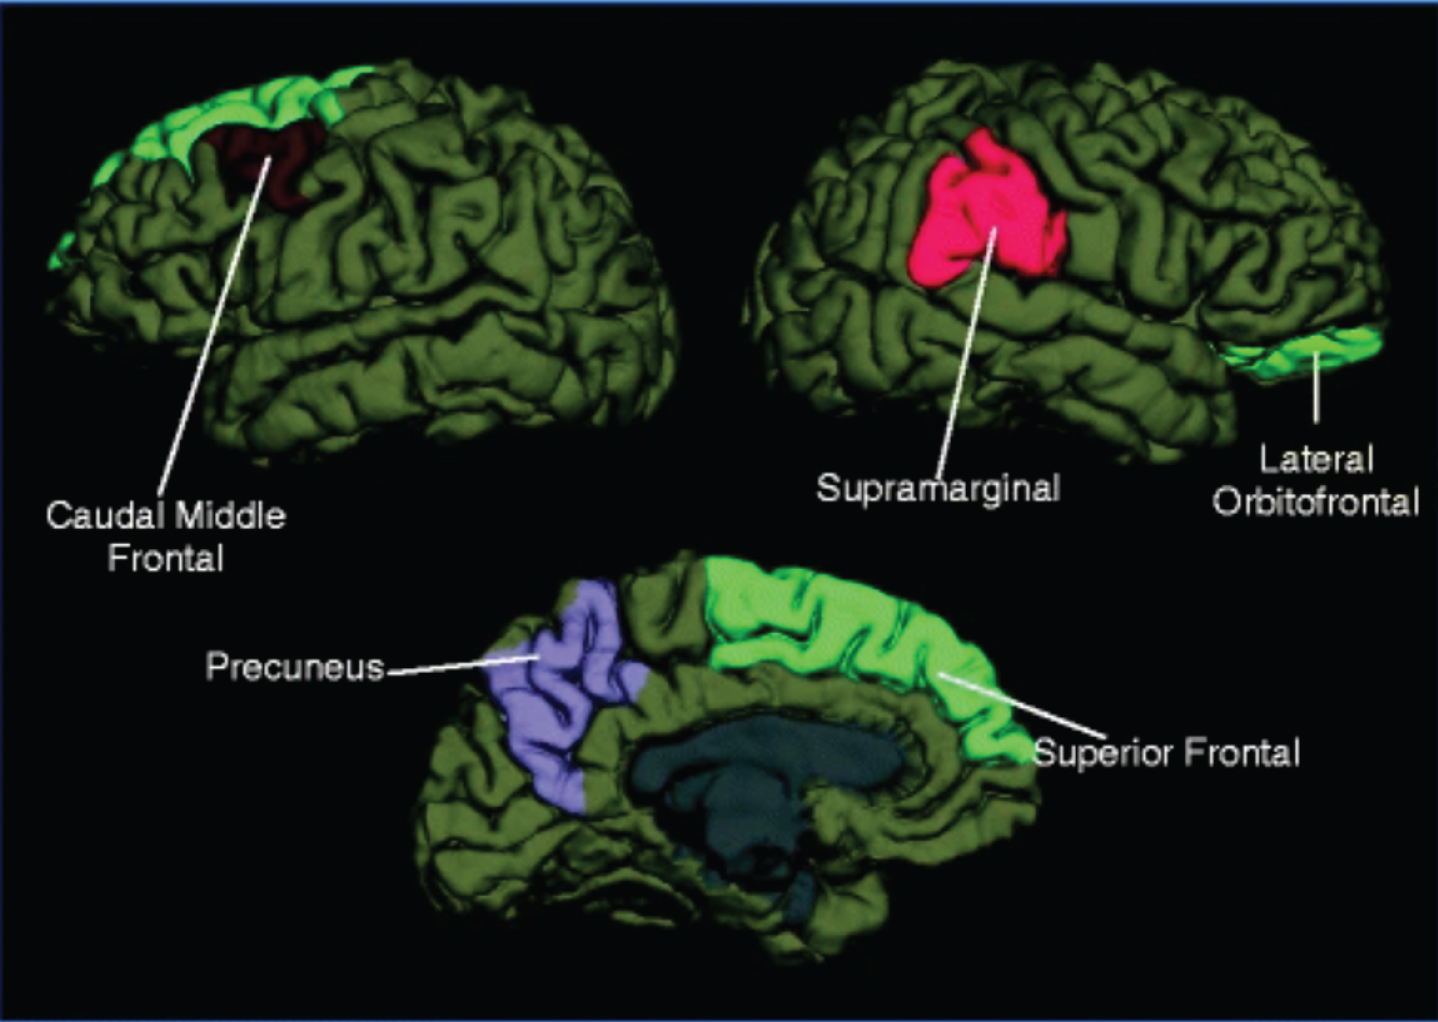 Regions with structural differences when comparing individuals with persistent post-traumatic cephalalgia (PPTC) to those with migraine. When comparing structural measurements of entire brain regions in patients with PPTC to patients with migraine, the right lateral orbital frontal region differed in area, volume, and curvature. The left caudal middle frontal, precuneus, and superior frontal regions and the right supramarginal gyrus region differed in cortical thickness (Schwedt et al., 2017).